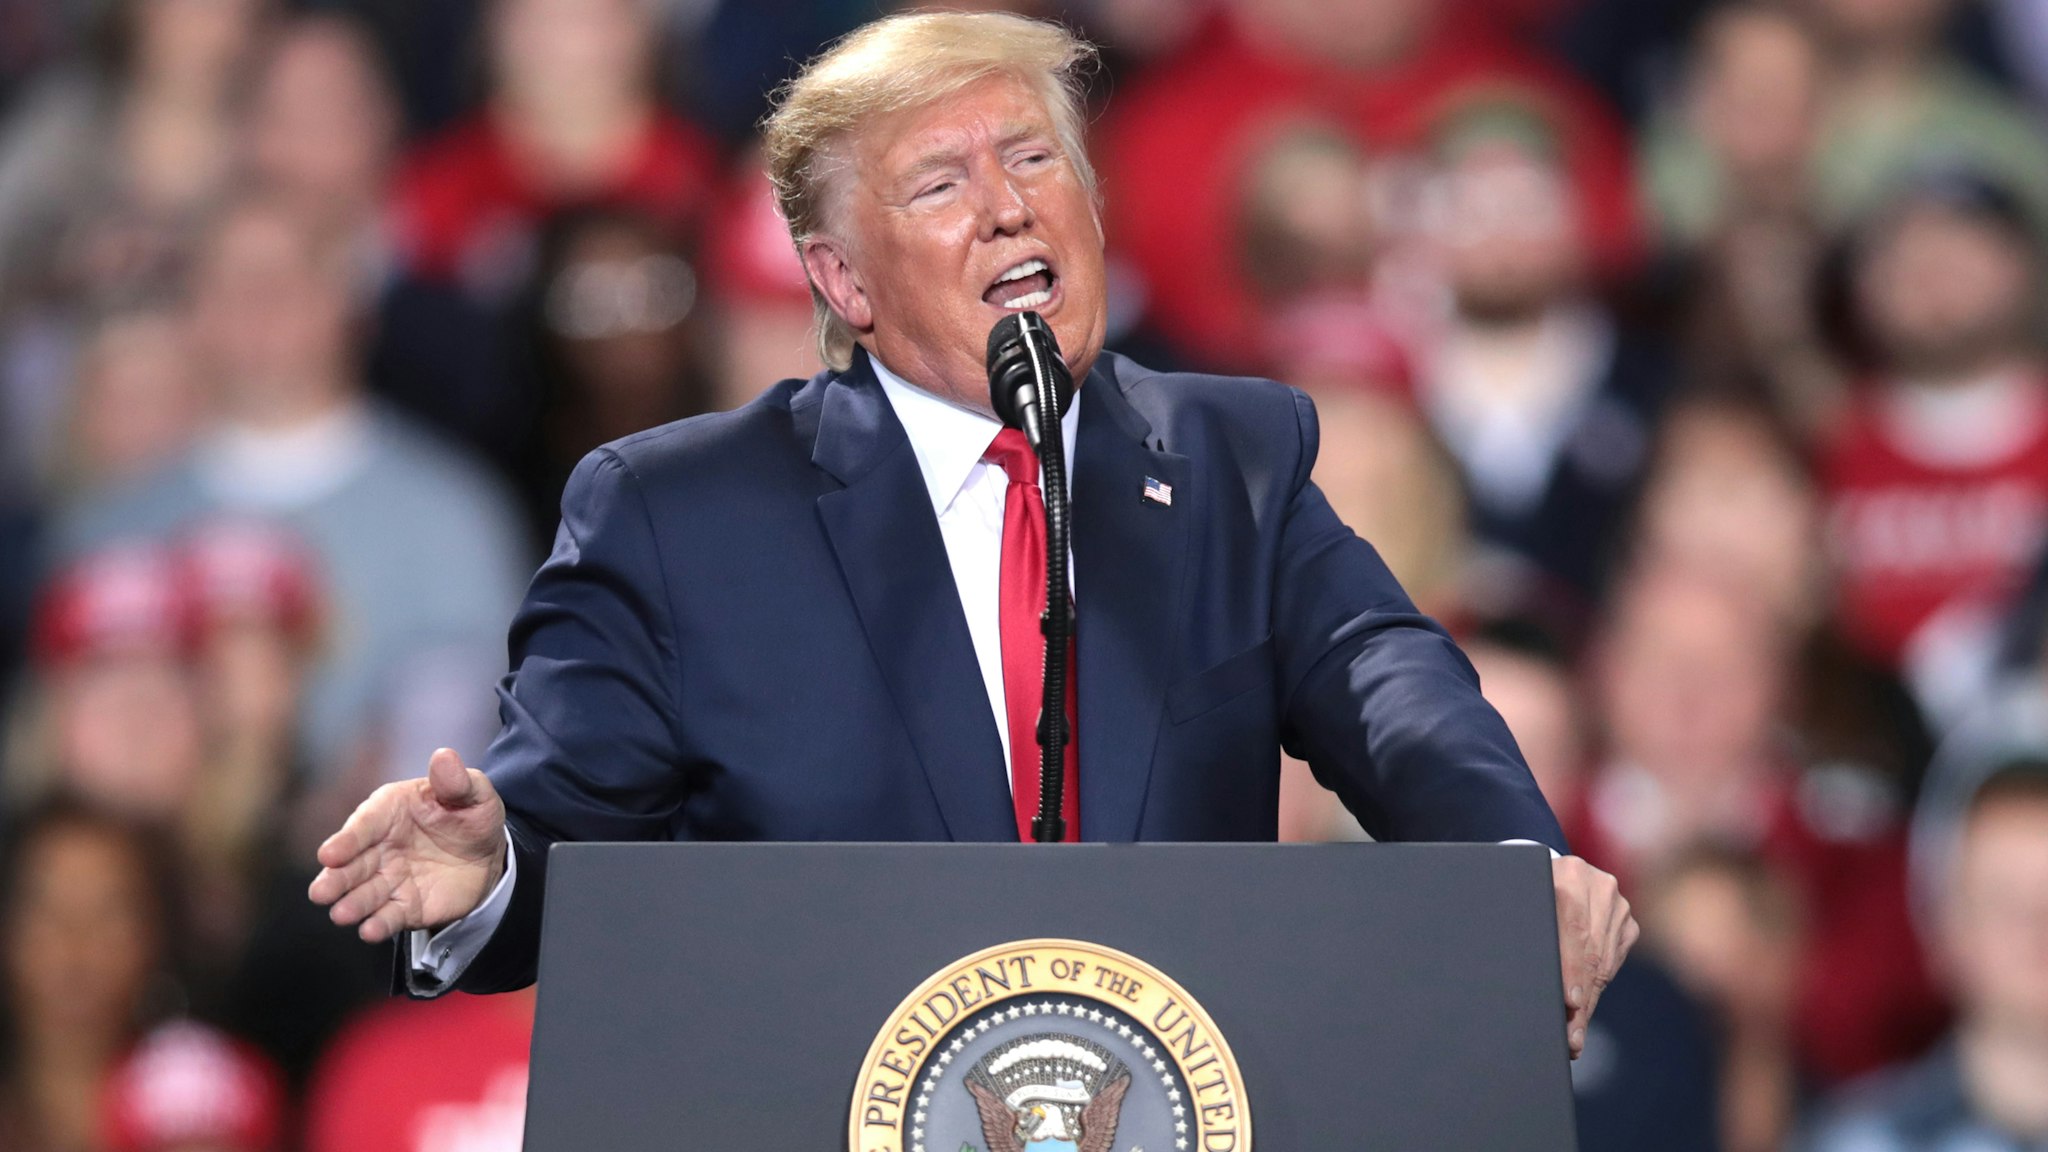 BATTLE CREEK, MICHIGAN - DECEMBER 18: President Donald Trump addresses his impeachment after learning how the vote in the House was divided during a Merry Christmas Rally at the Kellogg Arena on December 18, 2019 in Battle Creek, Michigan. While Trump spoke at the rally the House of Representatives voted, mostly along party lines, to impeach the president for abuse of power and obstruction of Congress, making him just the third president in U.S. history to be impeached.